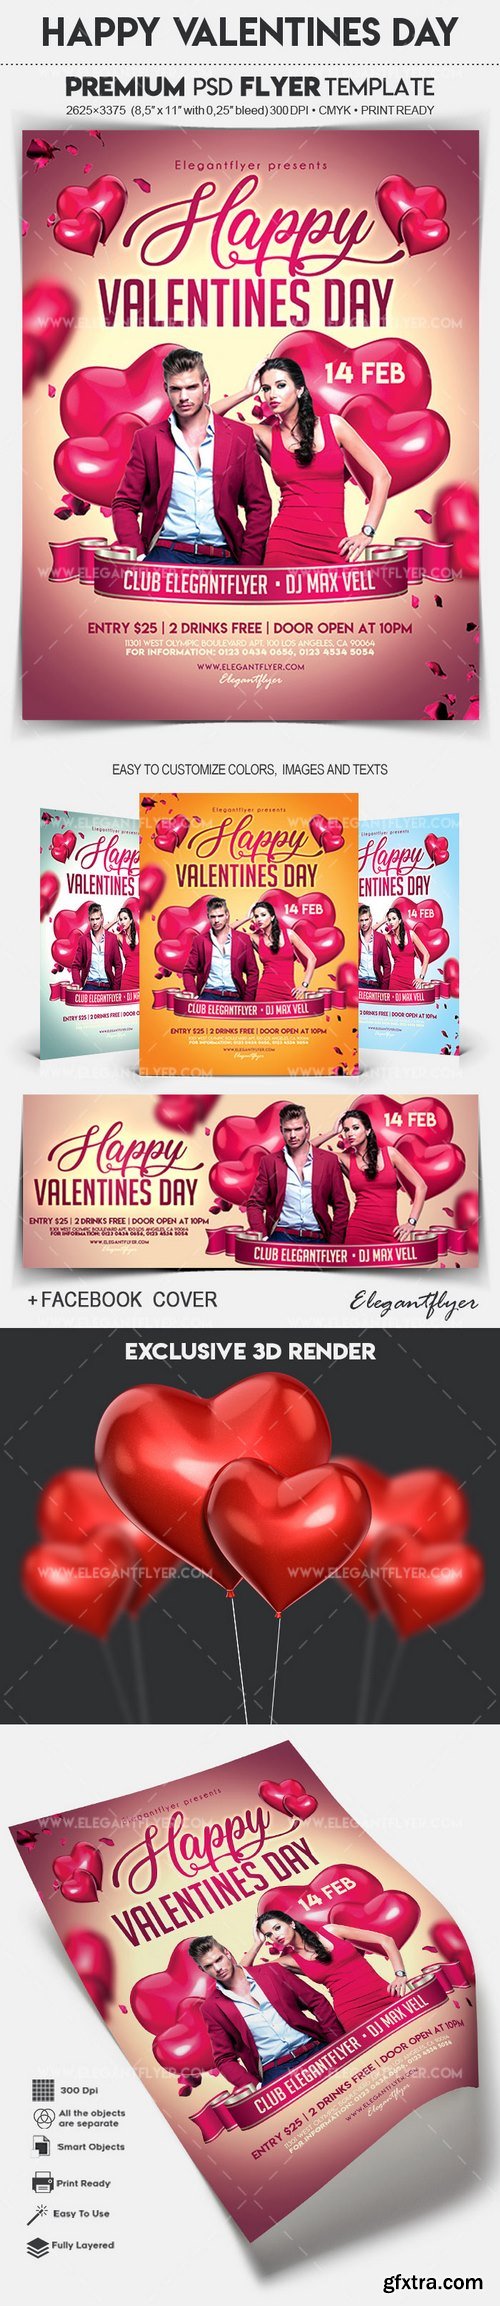 Happy Valentines Day – Flyer PSD Template + Facebook Cover